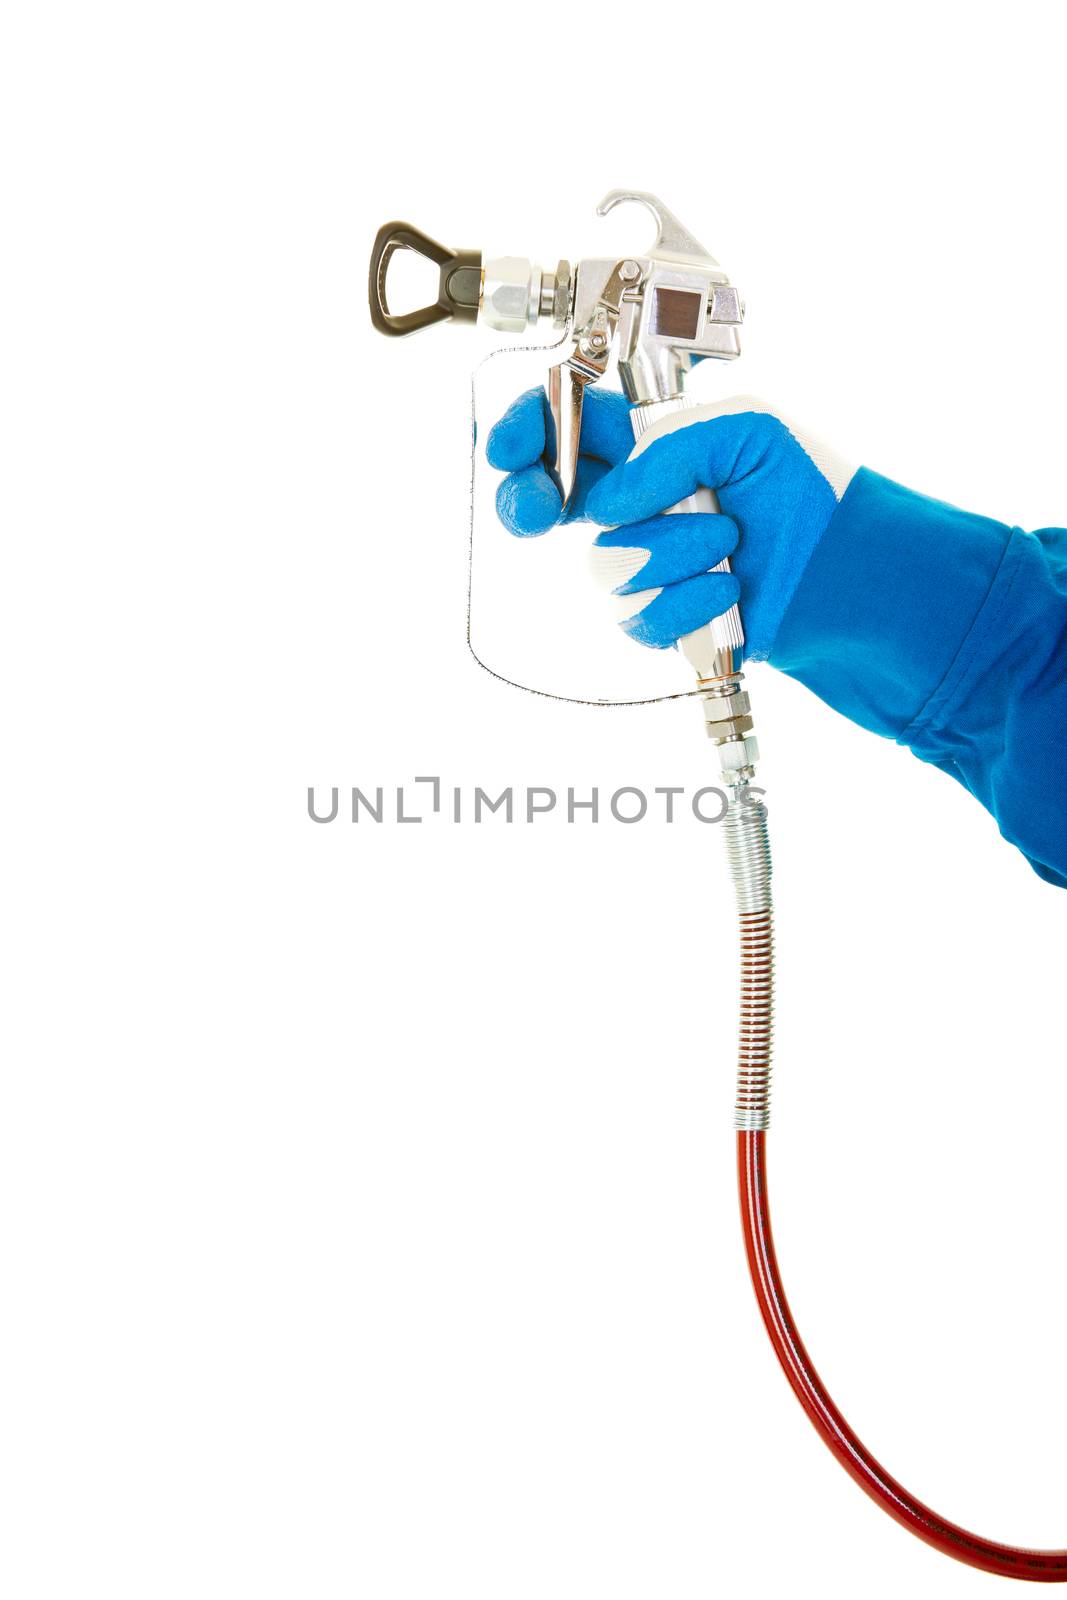 A painter's arm and hand in safety coveralls and gloves holding an Industrial size airless spray gun used for industrial painting and coating.  Shot on white background.